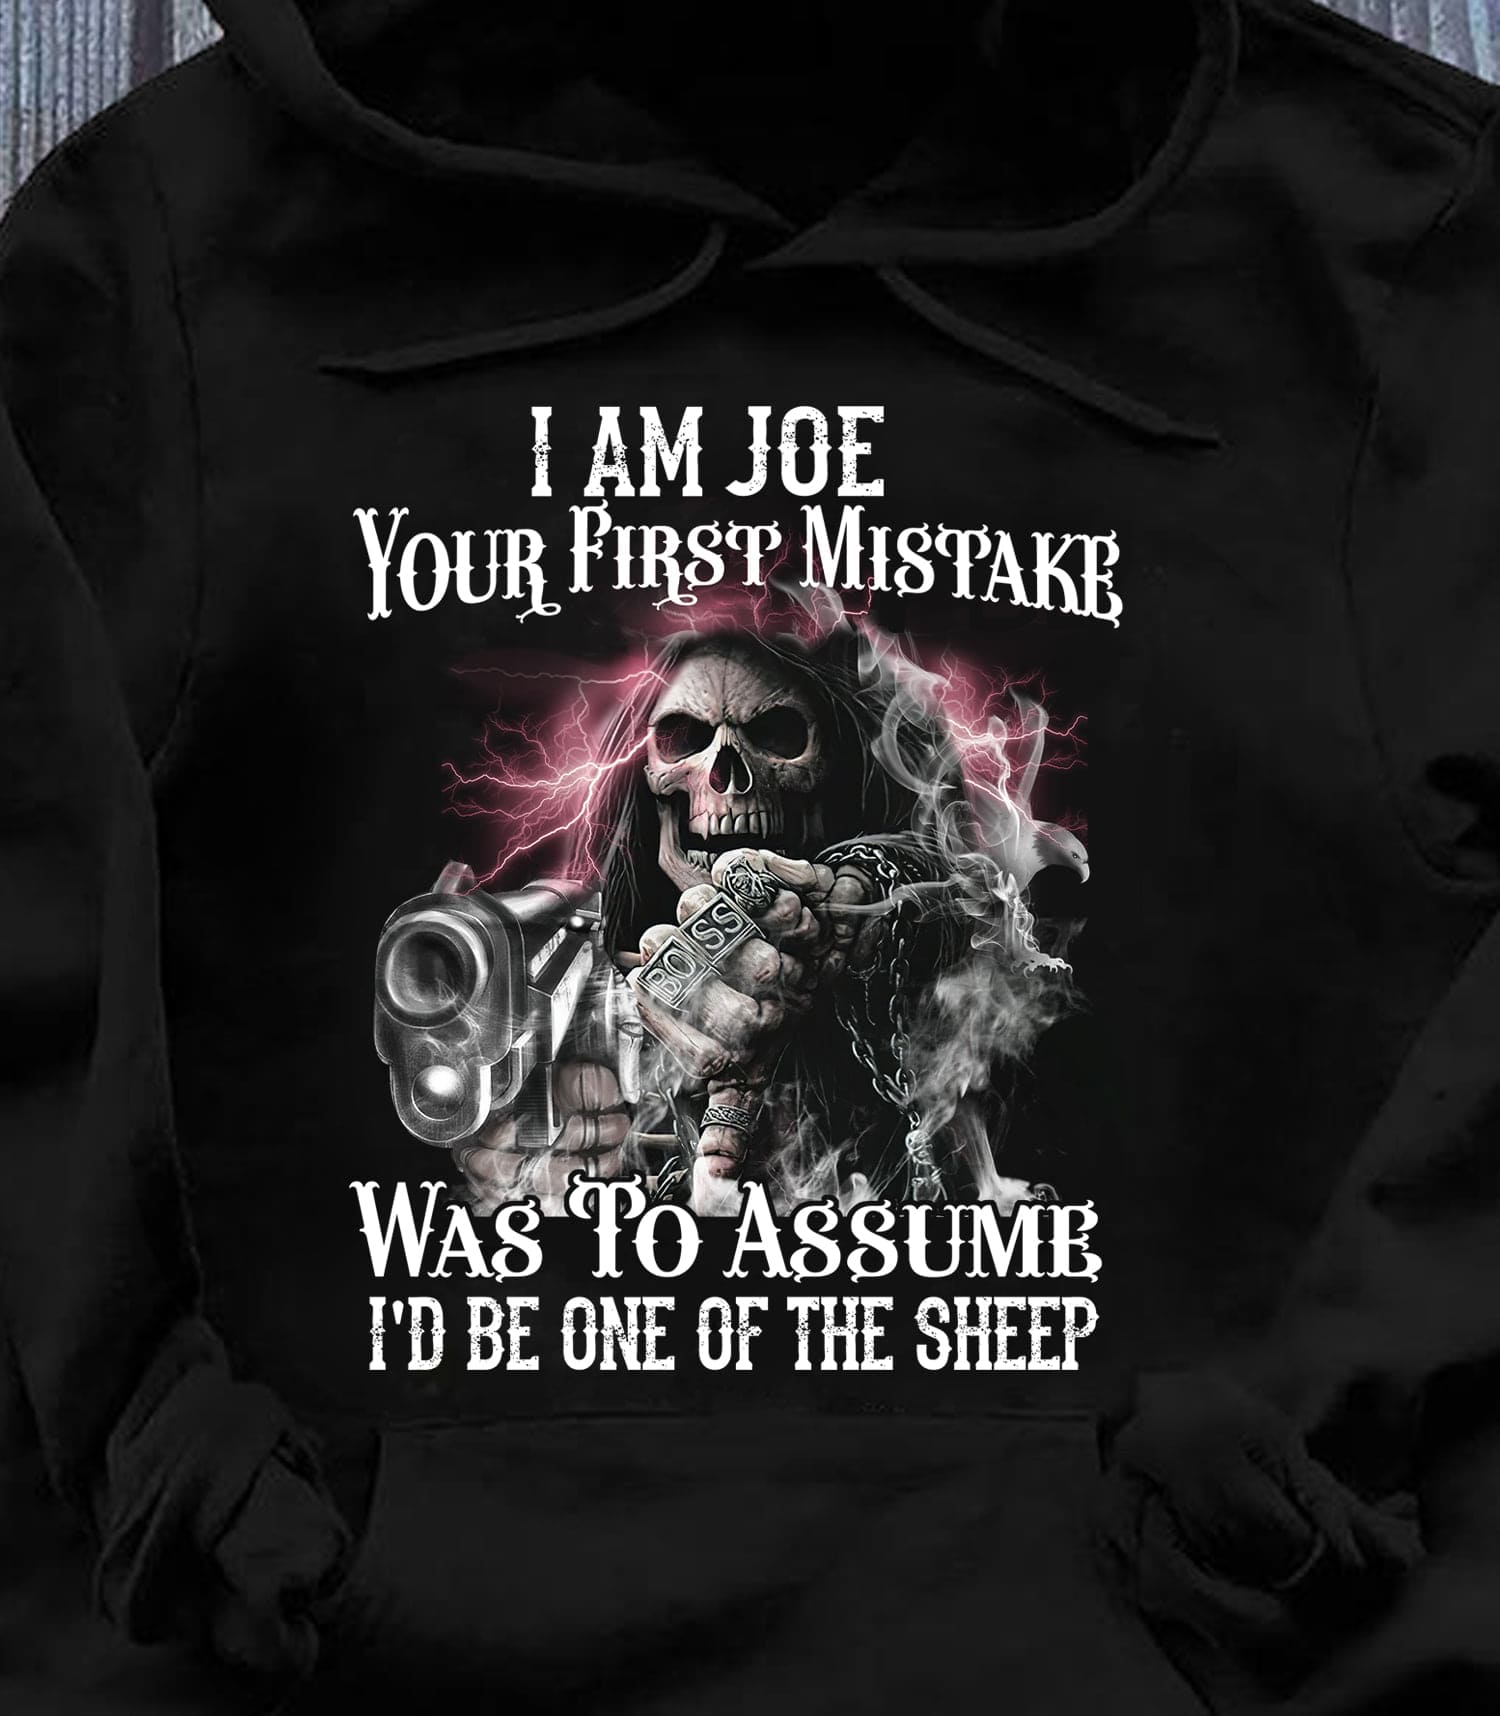 I am Joe your first mistake was to assume I'd be one of the sheep - Devil of the death, devil and gun